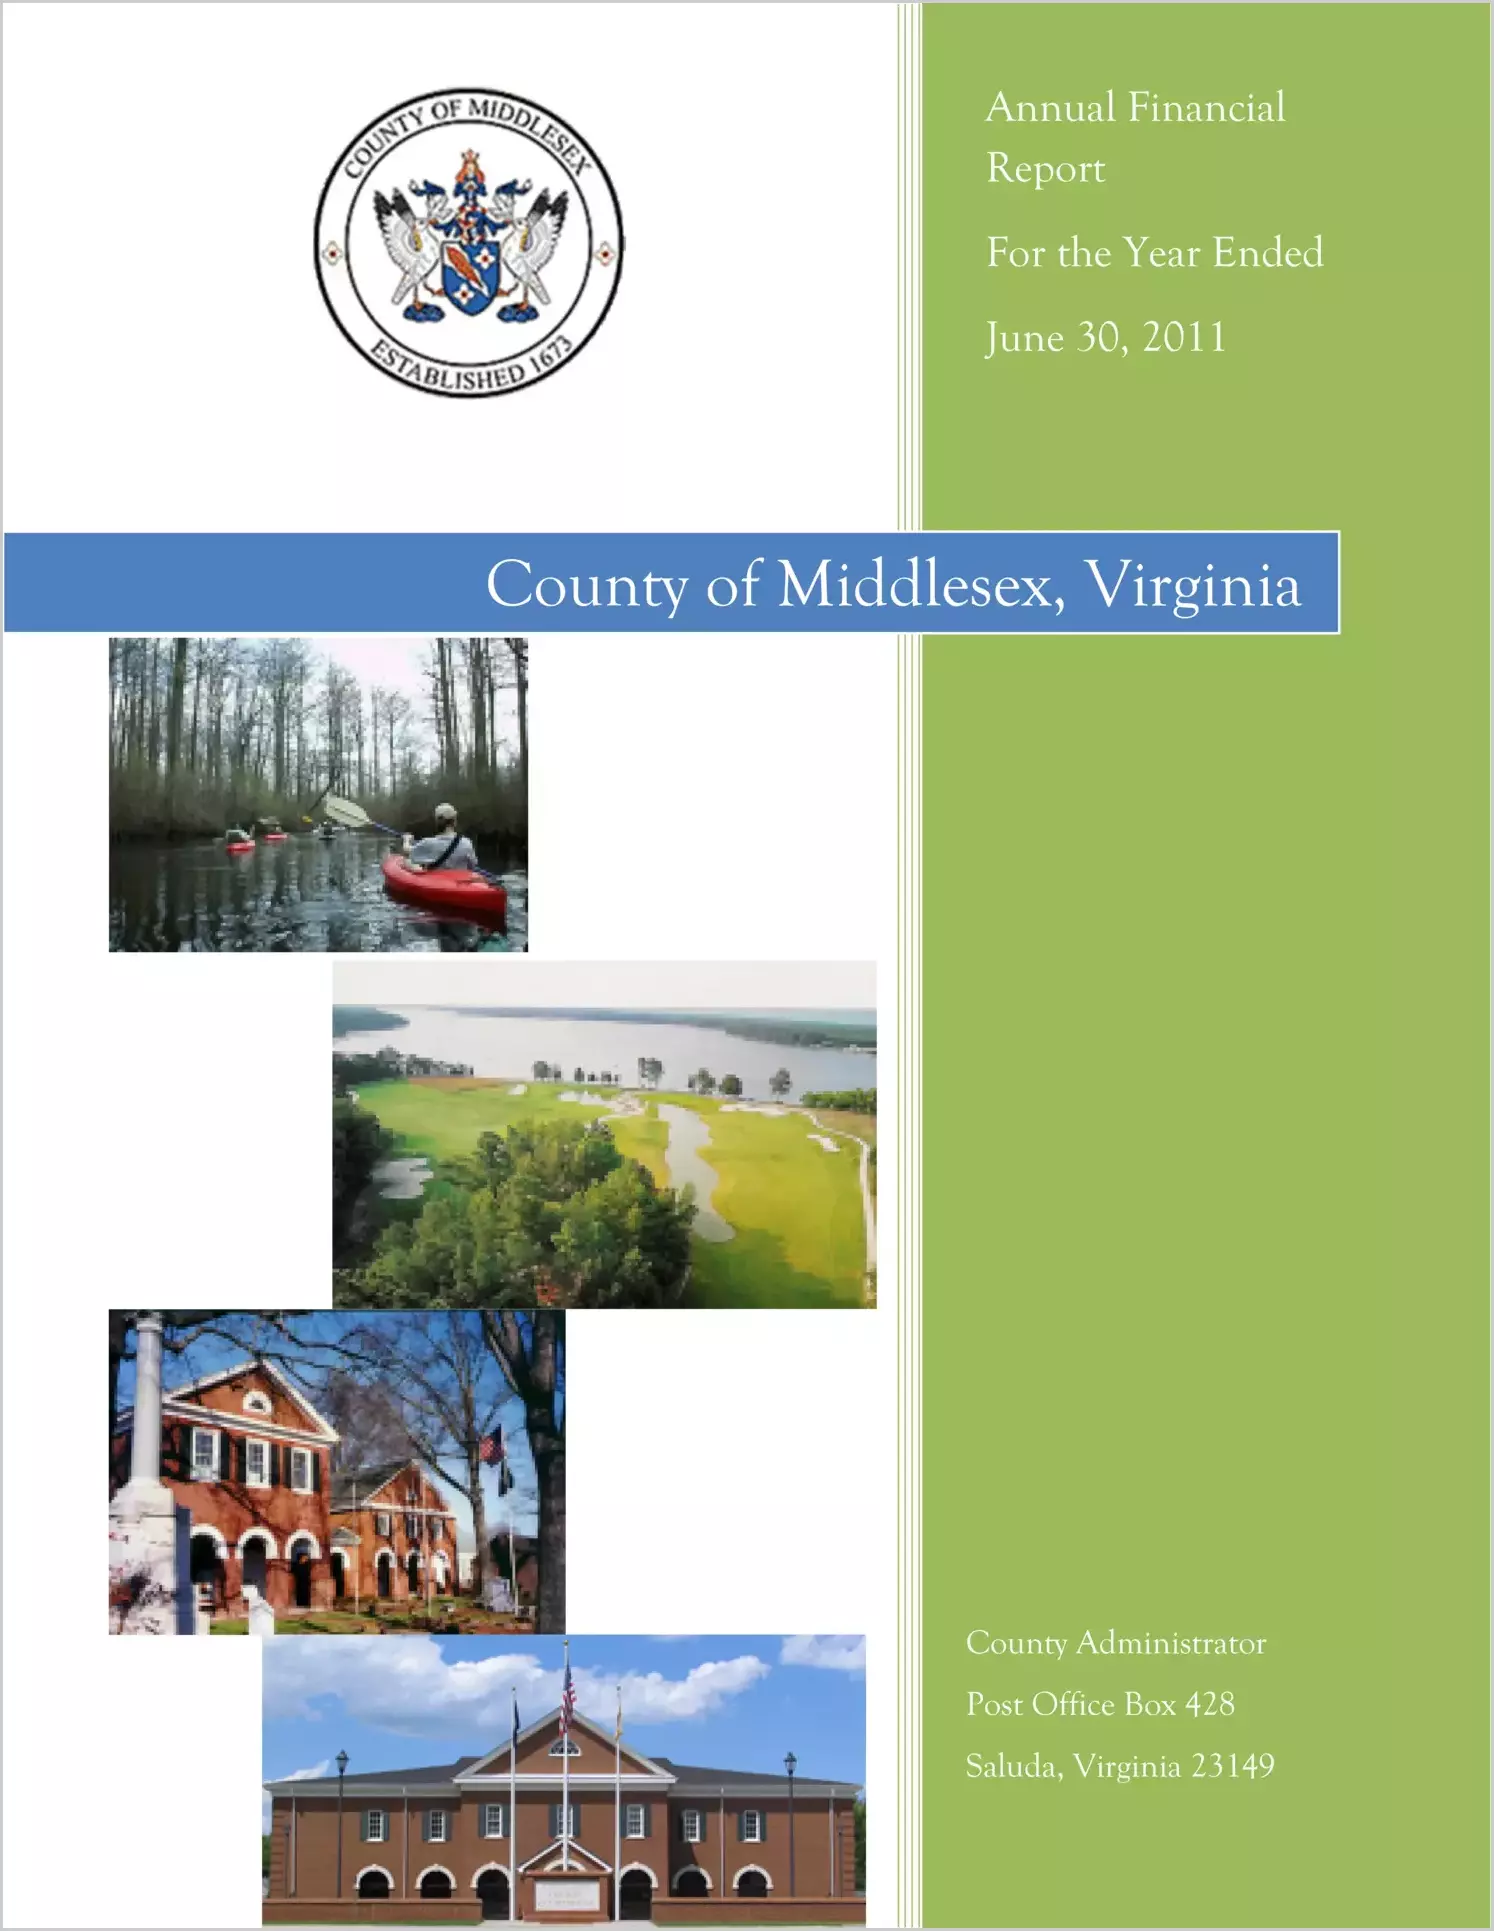 2011 Annual Financial Report for County of Middlesex